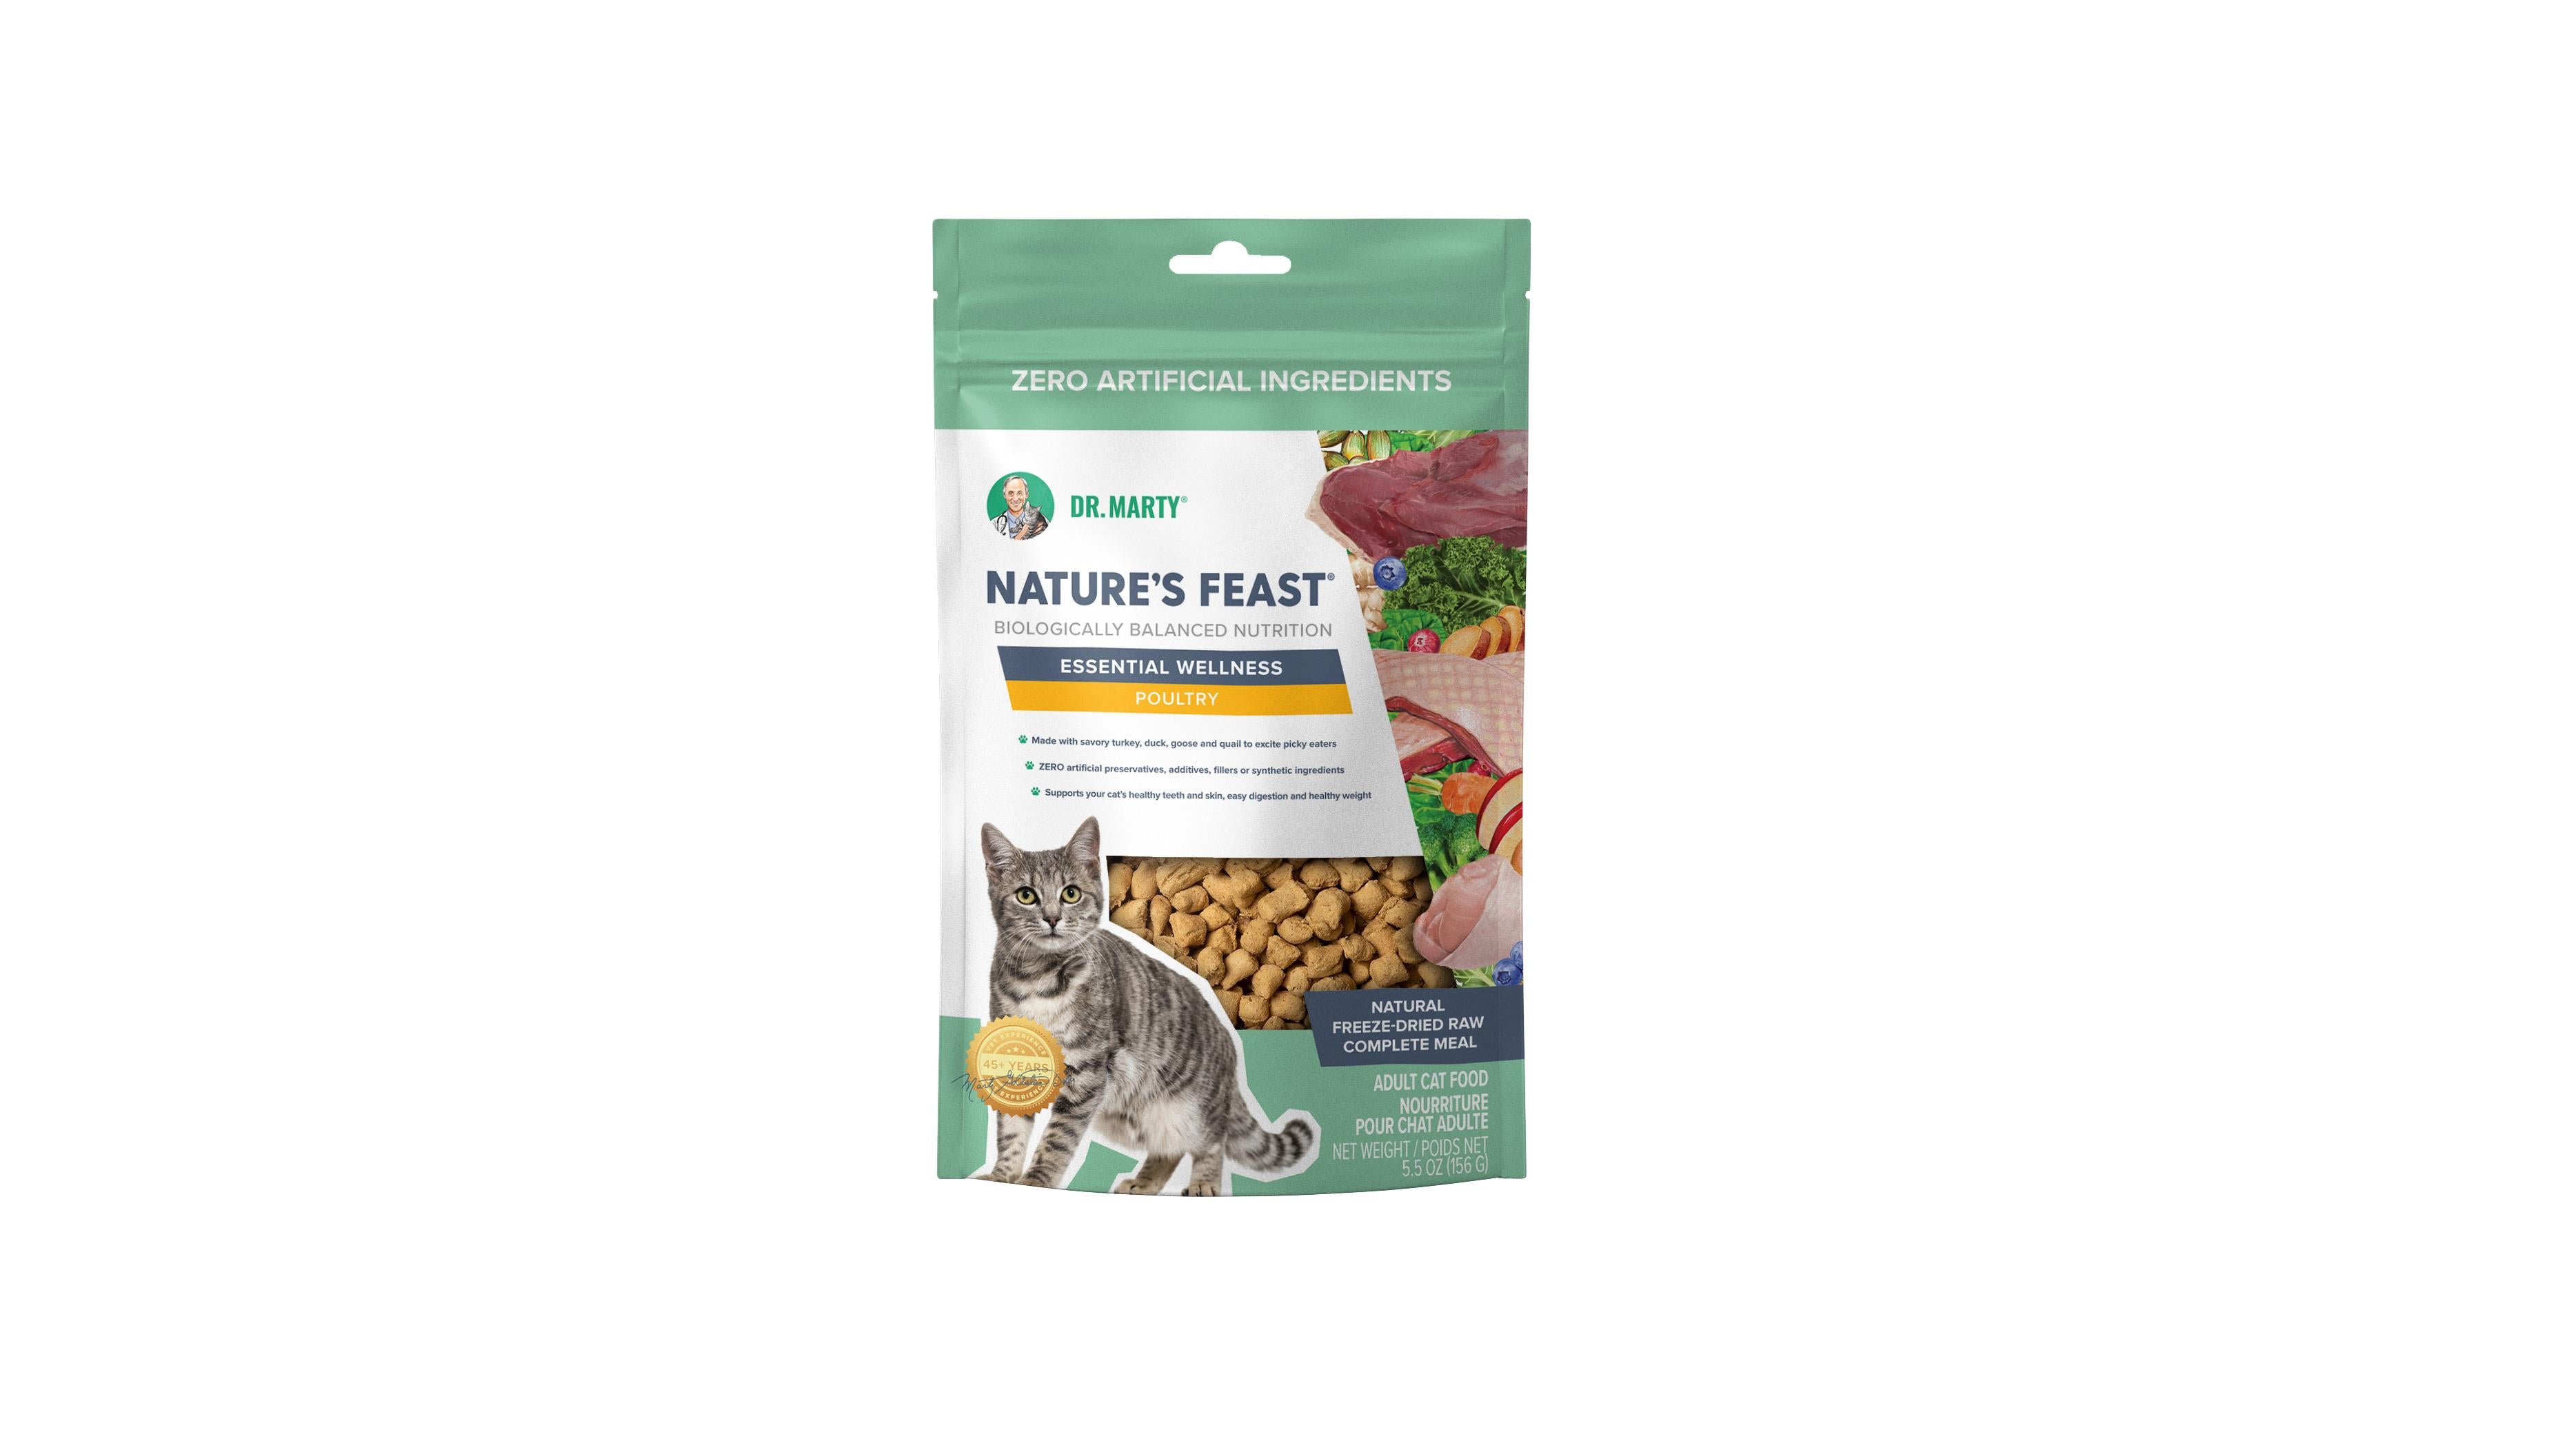 Dr. Marty Nature's Feast Essential Wellness  Poultry Freeze Dried Raw Cat Food  